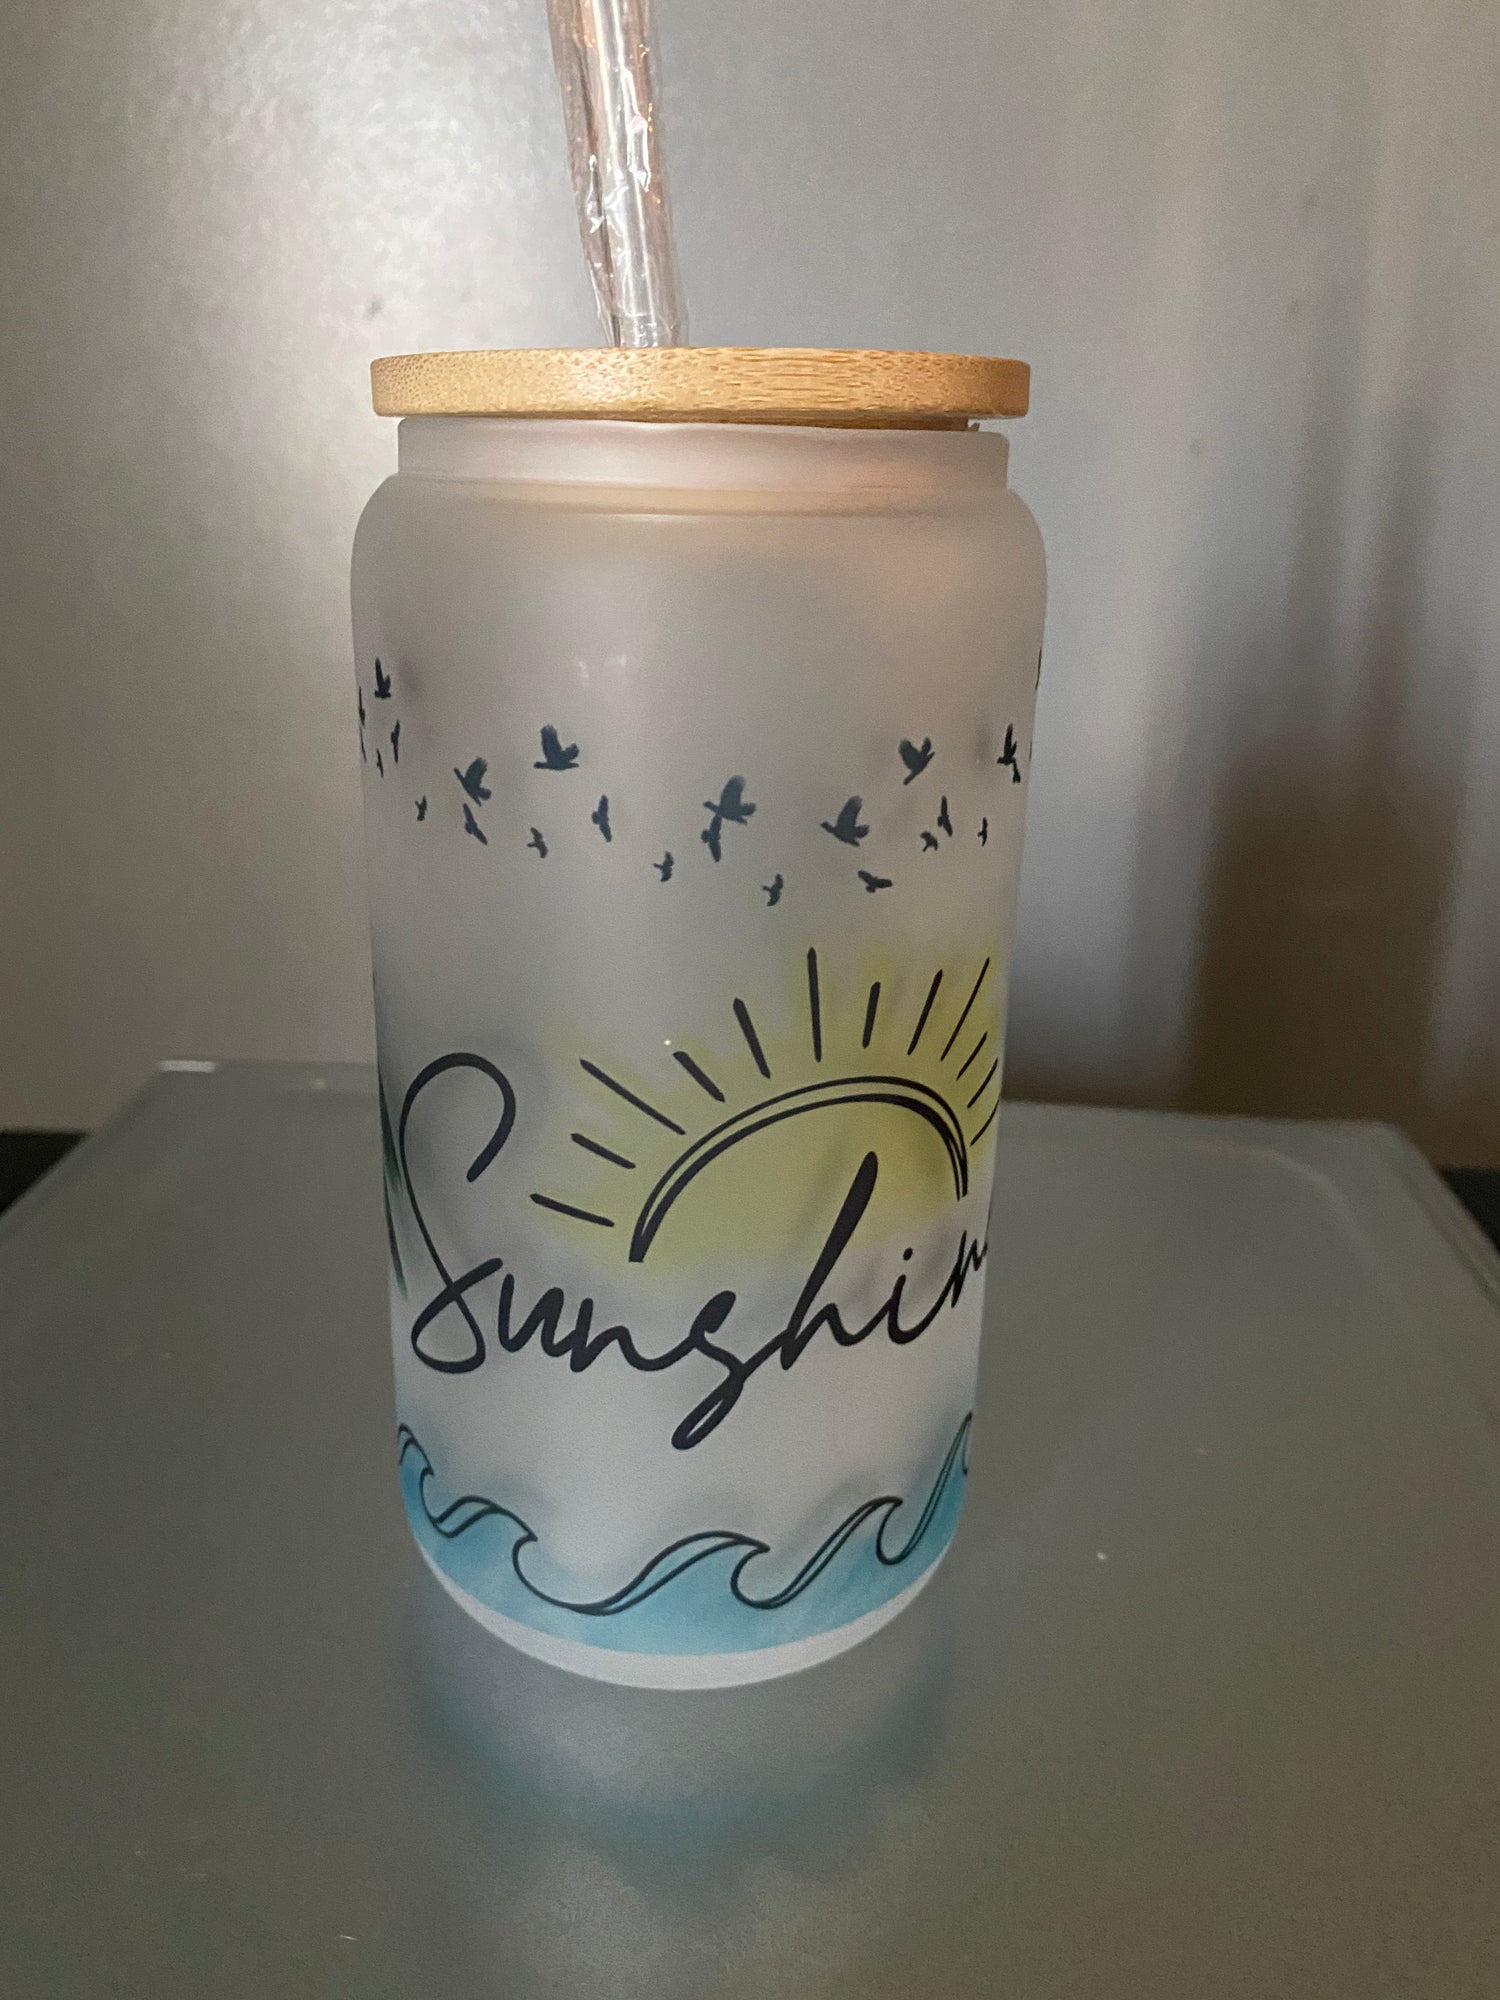 16 oz | Sublimation Can Glass w/ Bamboo Lid & Straw